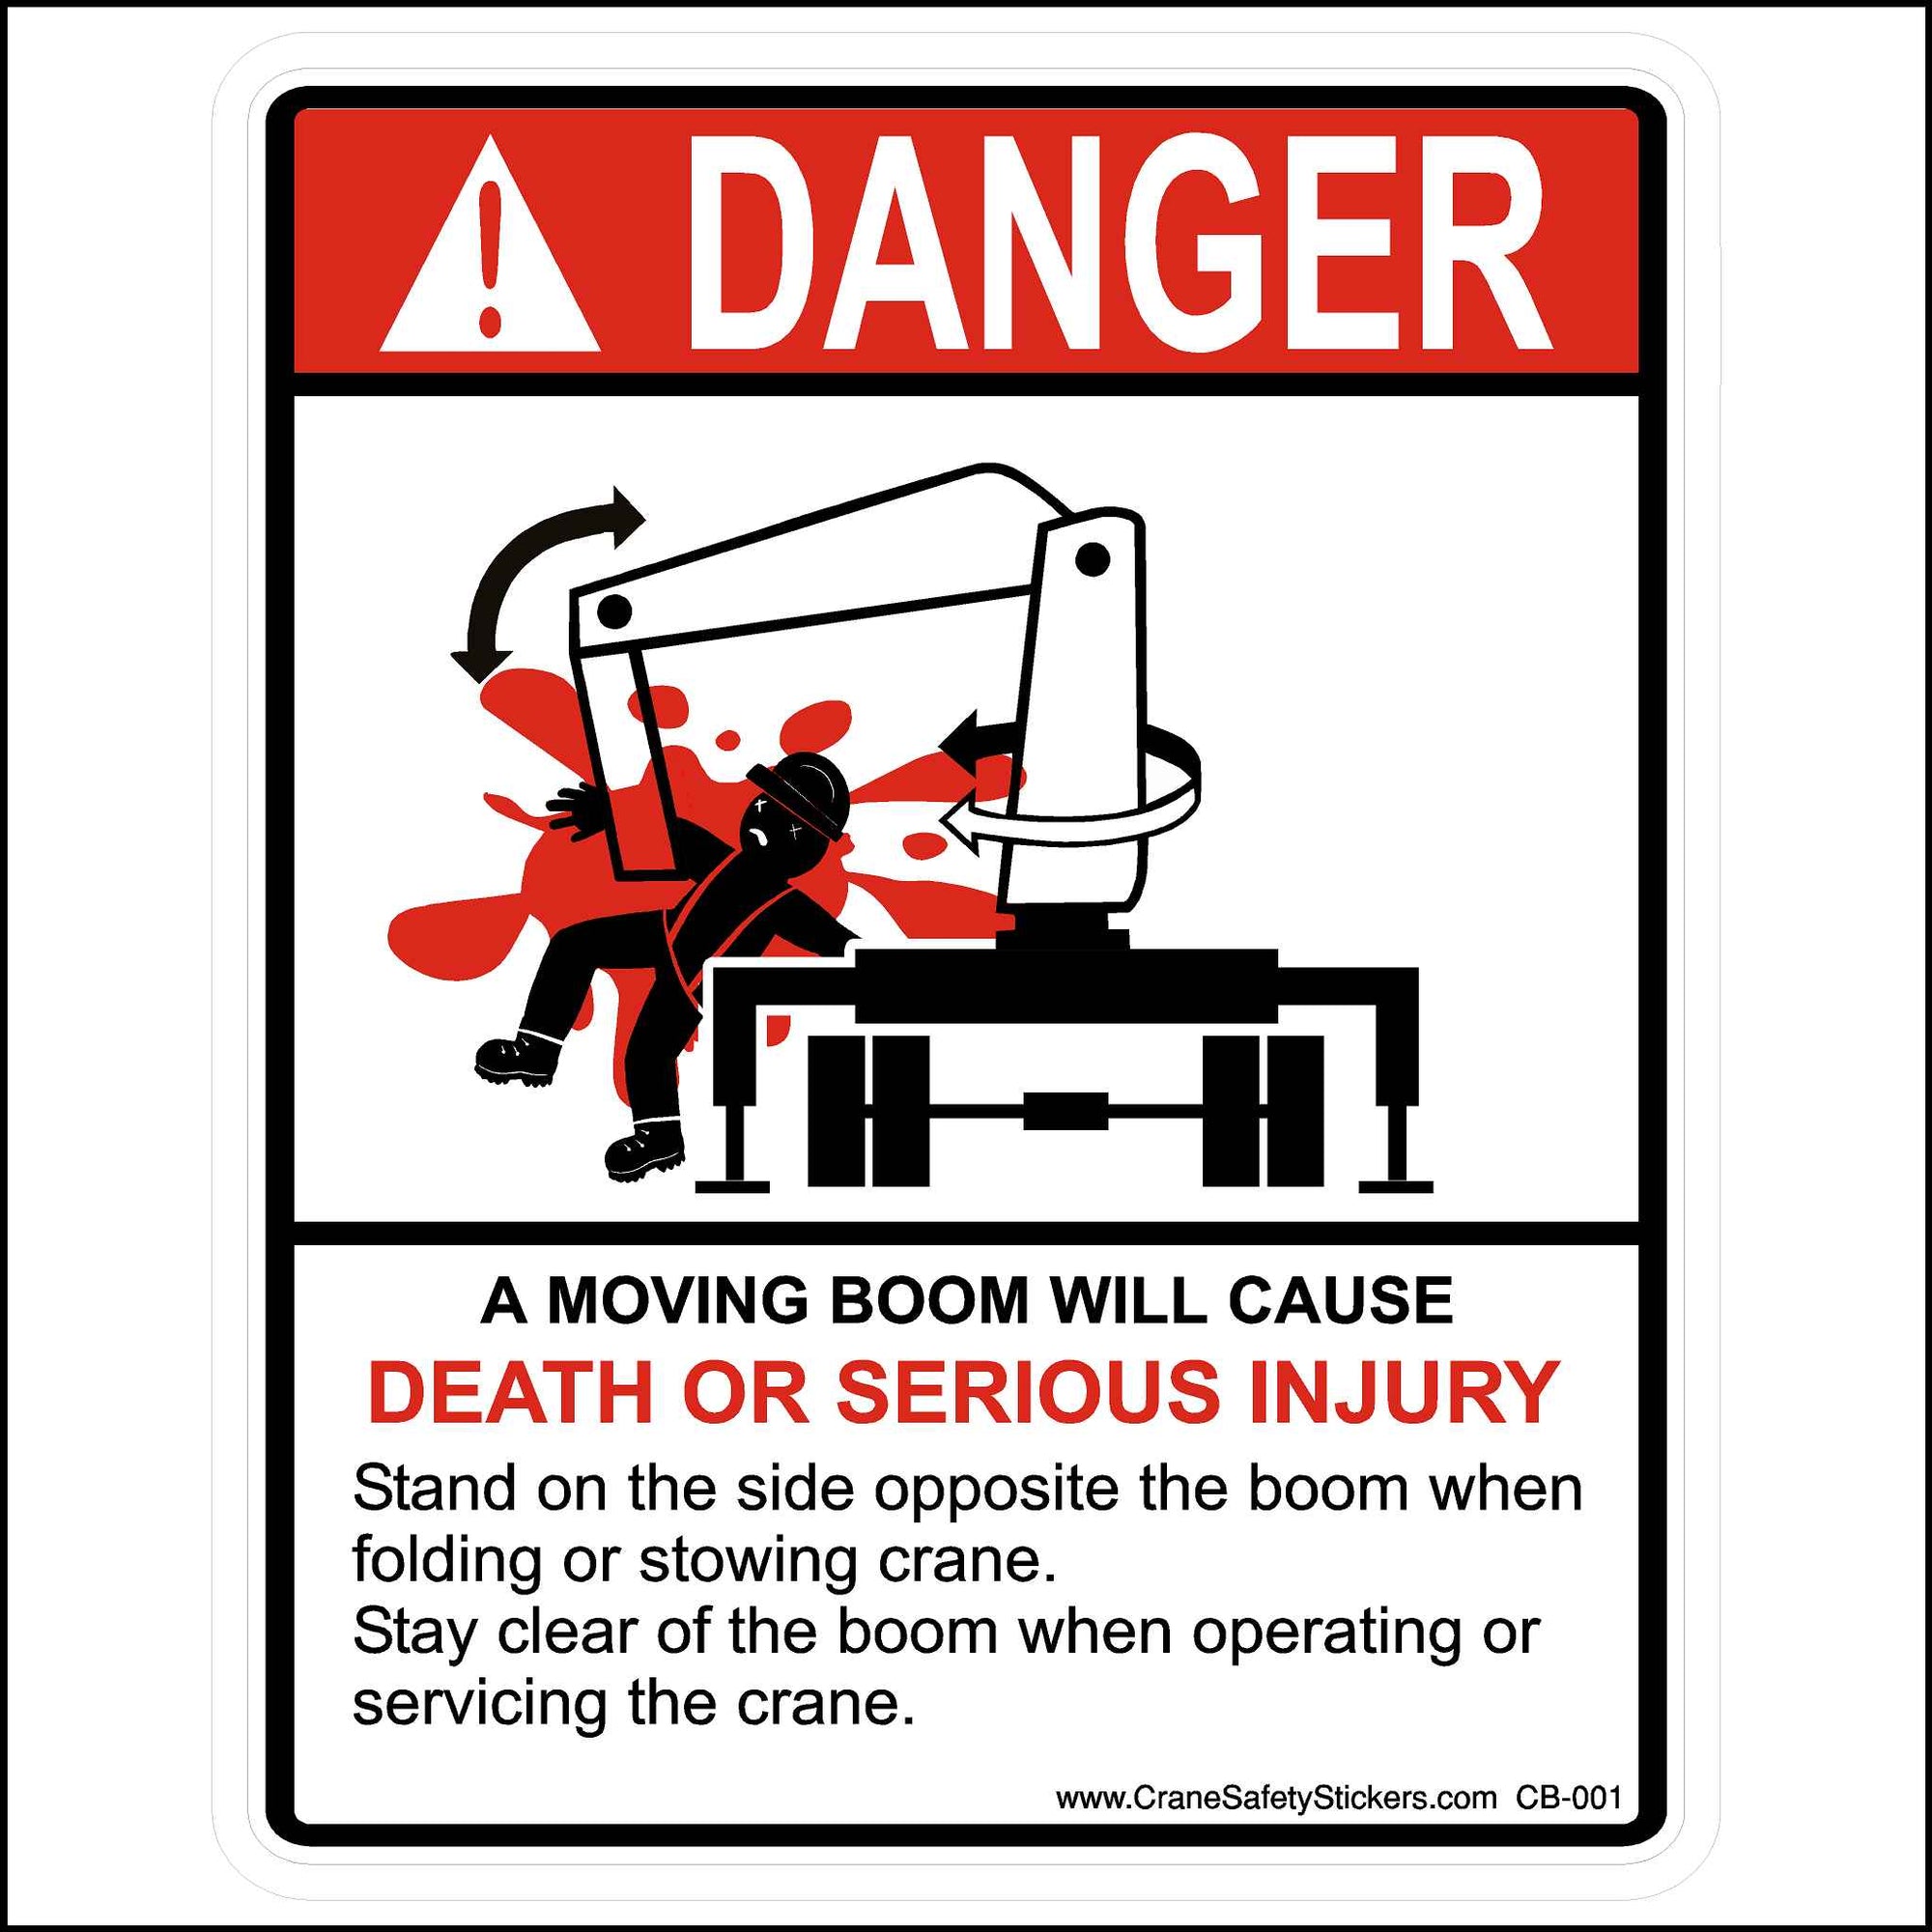 Crush Hazard Safety Labels Printed With DANGER A Moving Boom Will Cause Death or Serious Injury. Stand on the side opposite the boom when folding or stowing crane. Stay clear of the boom when operating or servicing the crane.